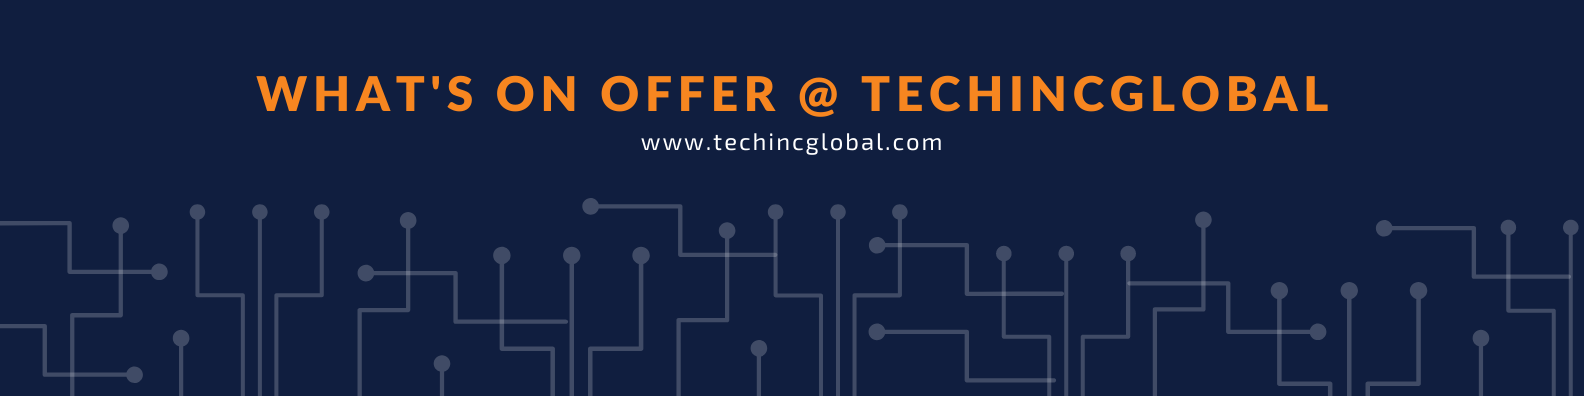 Why Choose Techincglobal? - Cover Image